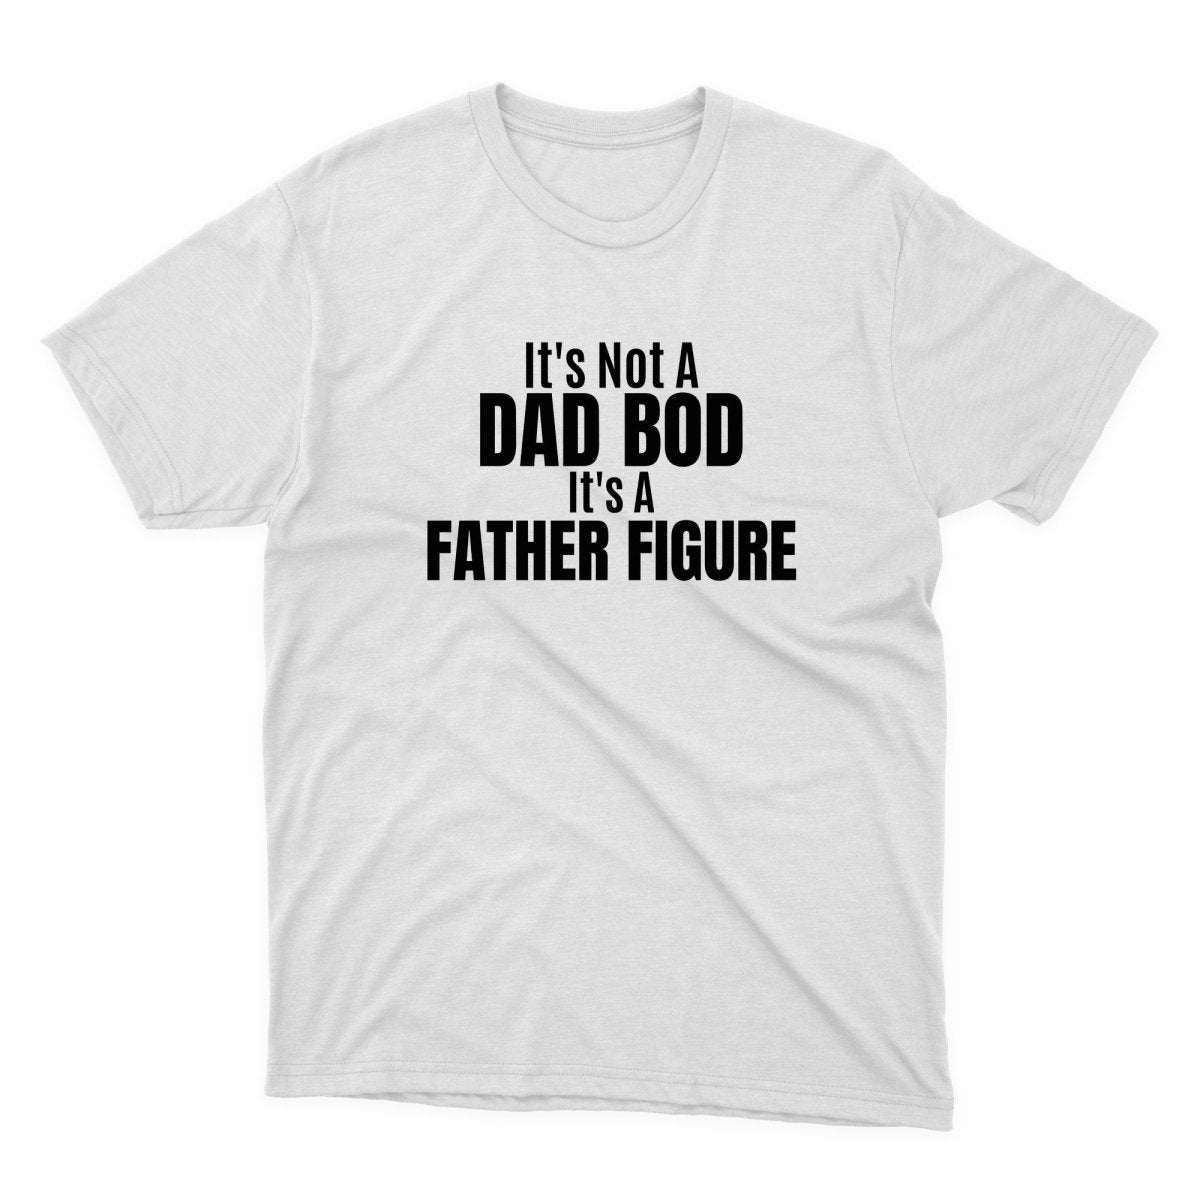 It's Not A Dad Bod It's A Father Figure Shirt - stickerbullIt's Not A Dad Bod It's A Father Figure ShirtShirtsPrintifystickerbull25182411820450116329WhiteSa white t - shirt that says it's not a dad bod it